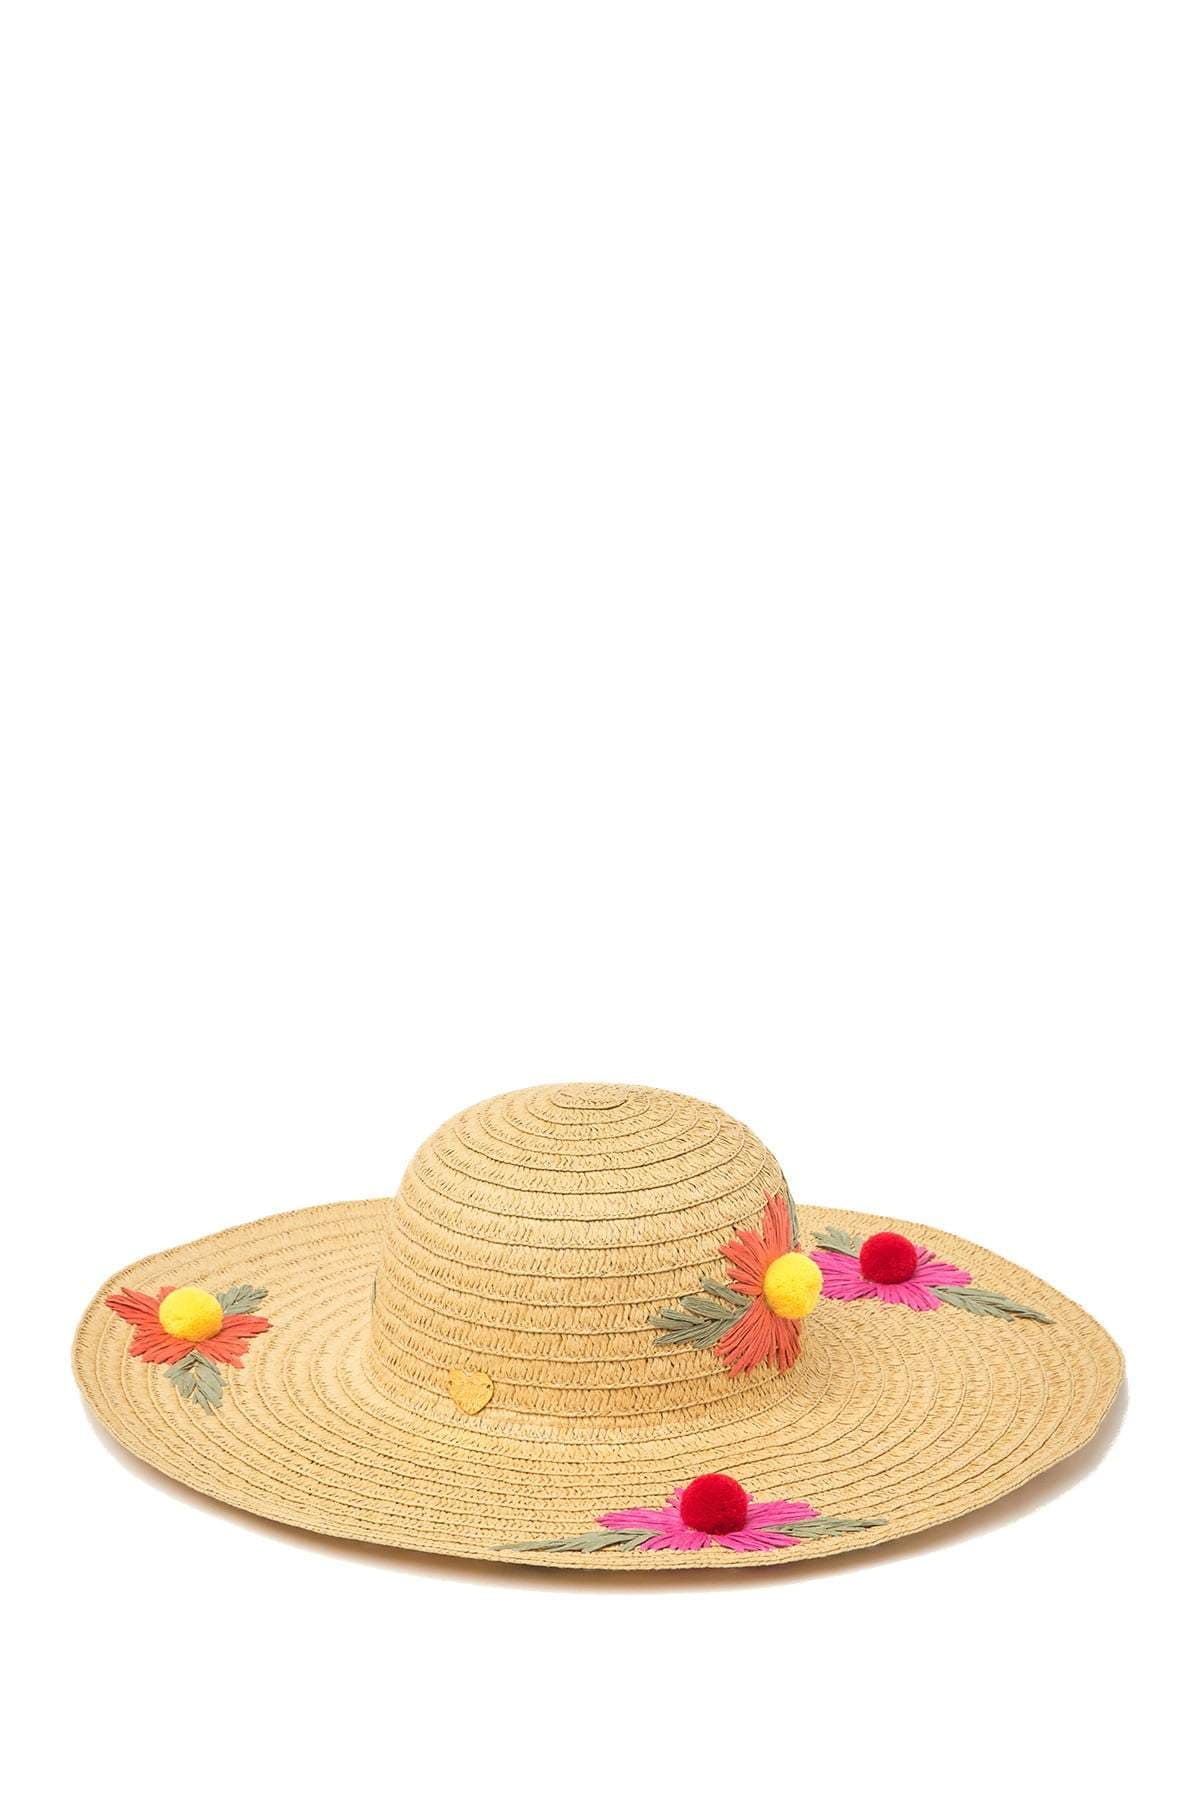 BETSEY JOHNSON Clothing Accessories One size / Sand BETSEY JOHNSON - Floral Bliss Paper Yarn Pom Pom Floppy Wide Hat